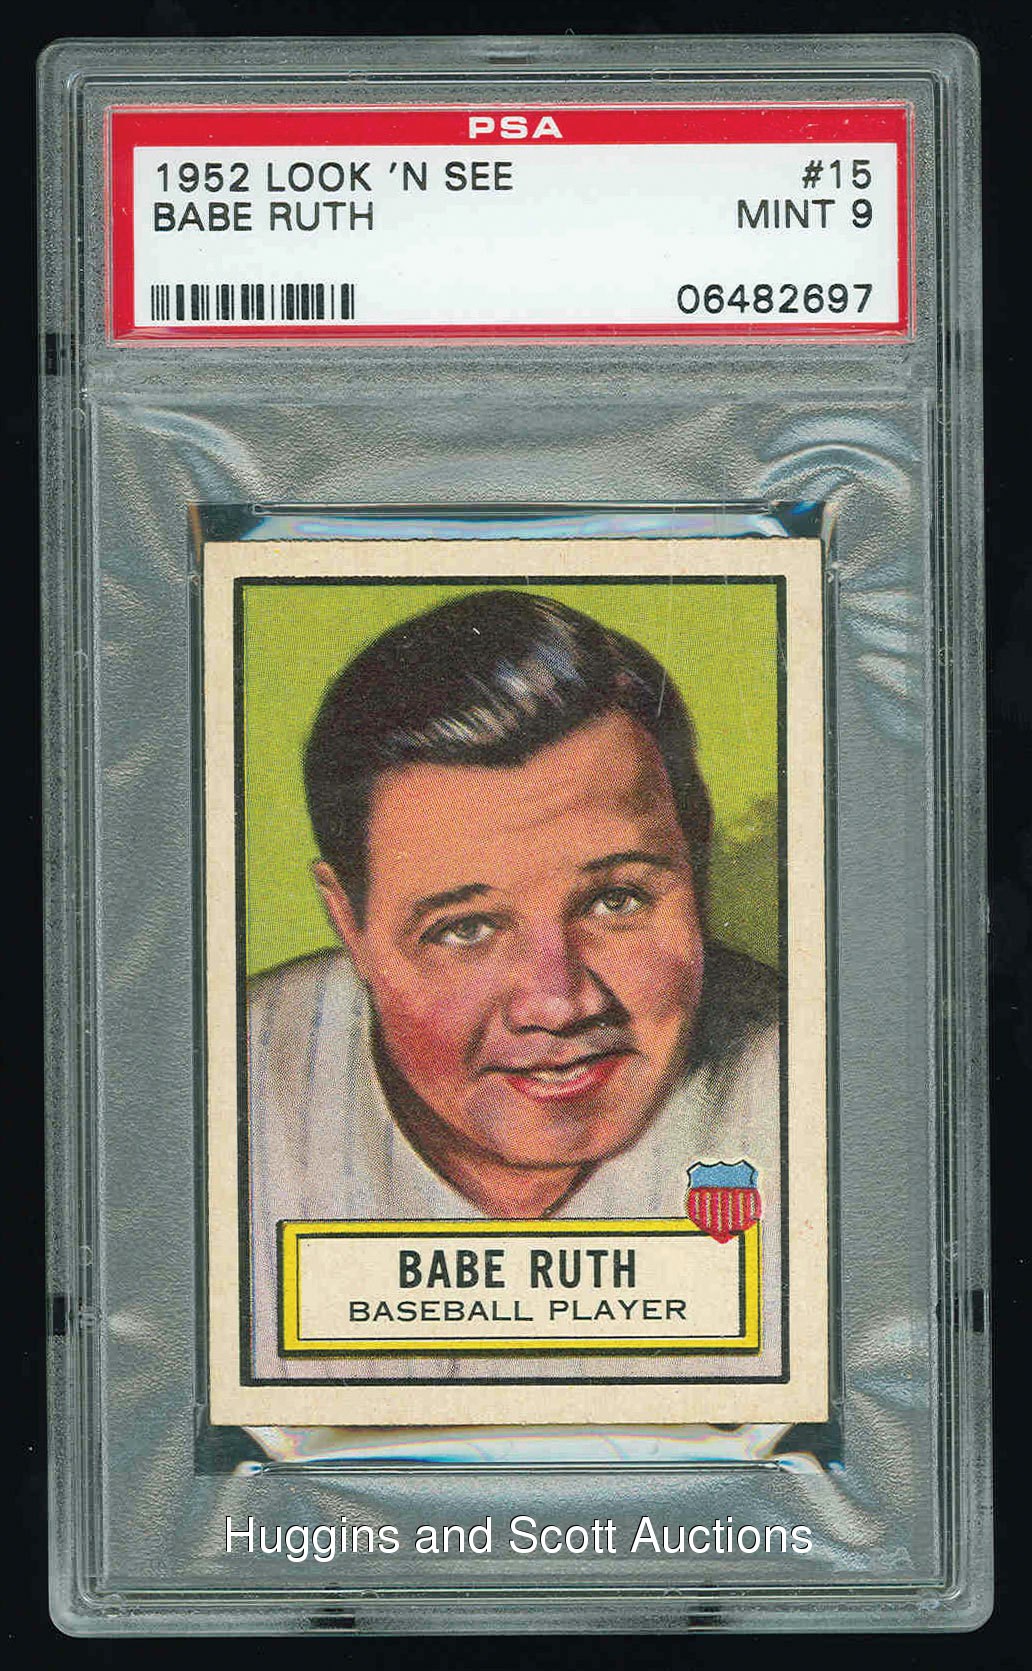 1952 Topps Look 'N See Babe Ruth PSA 9 Mint (pop.2)